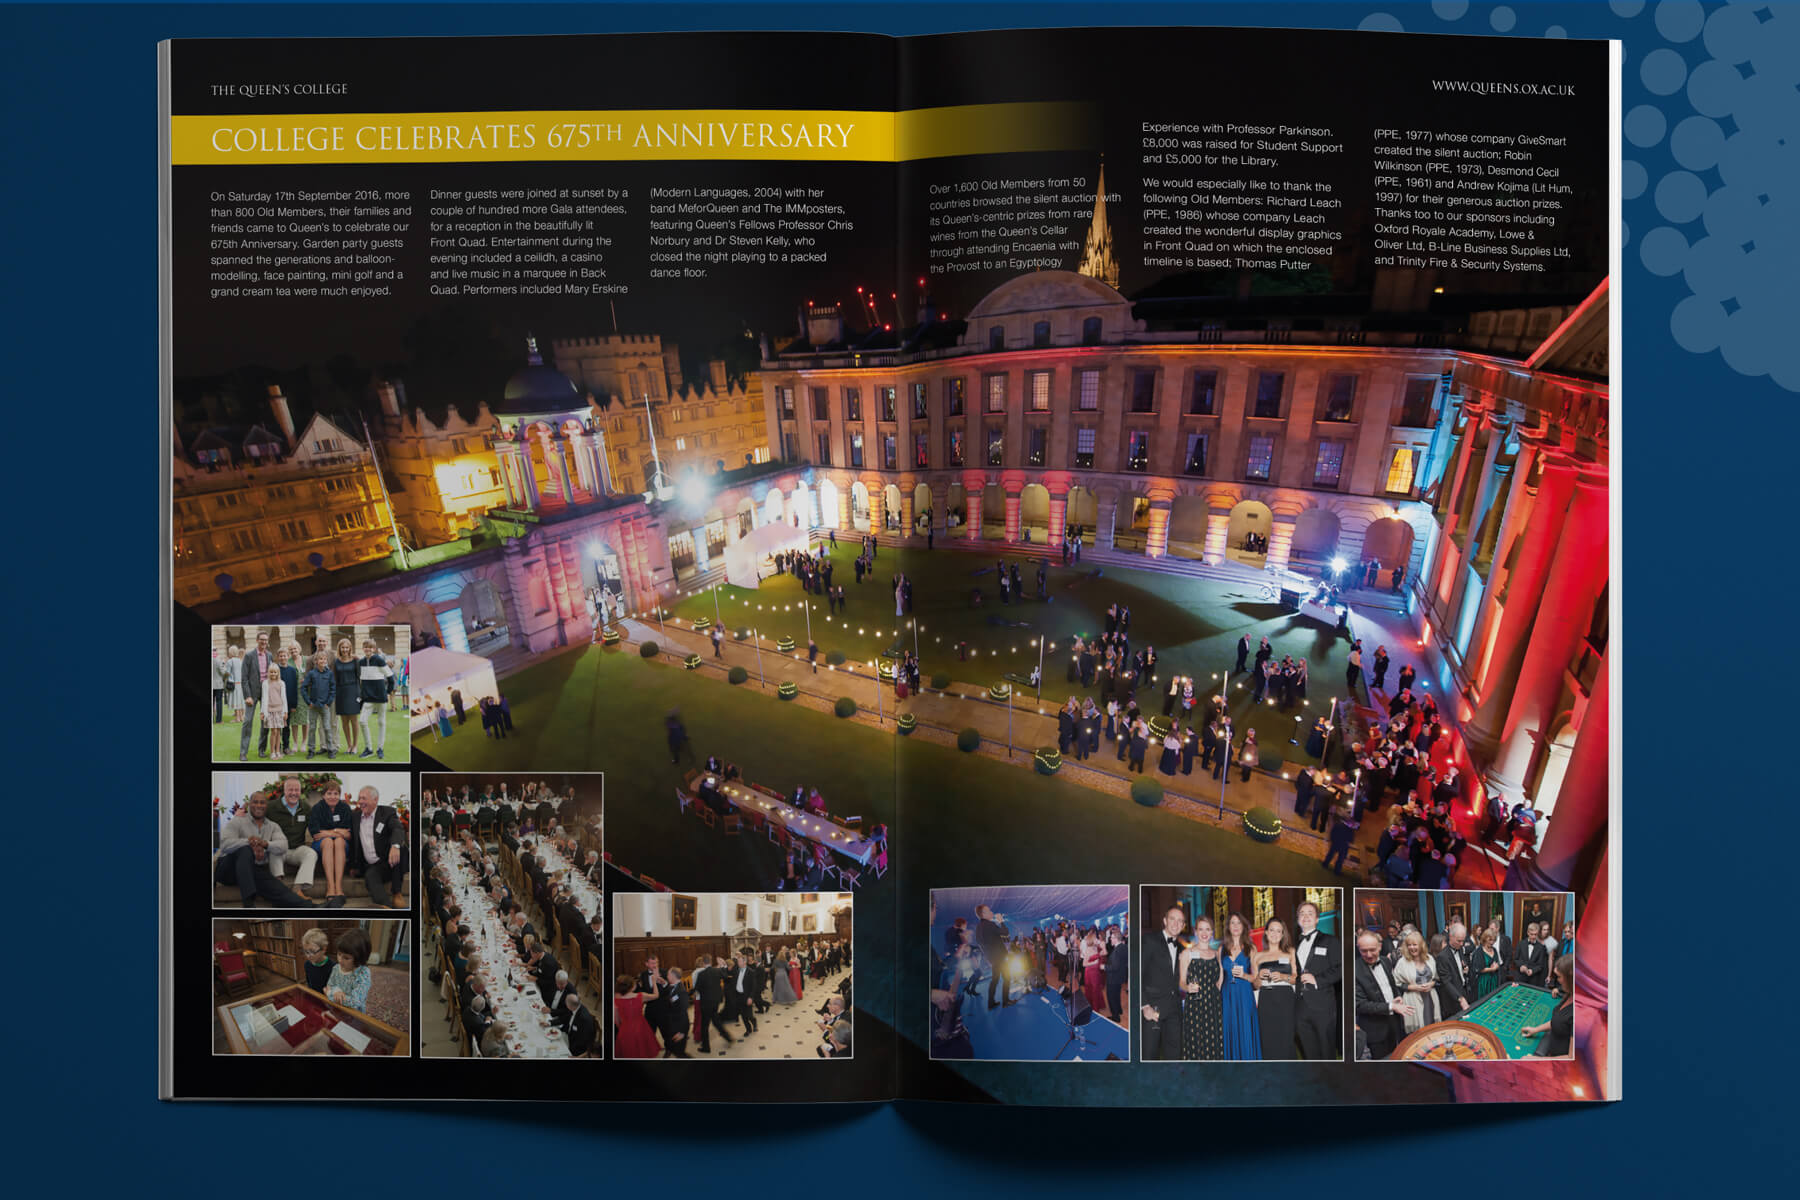 The Queen's College Newsletter inside spread 3